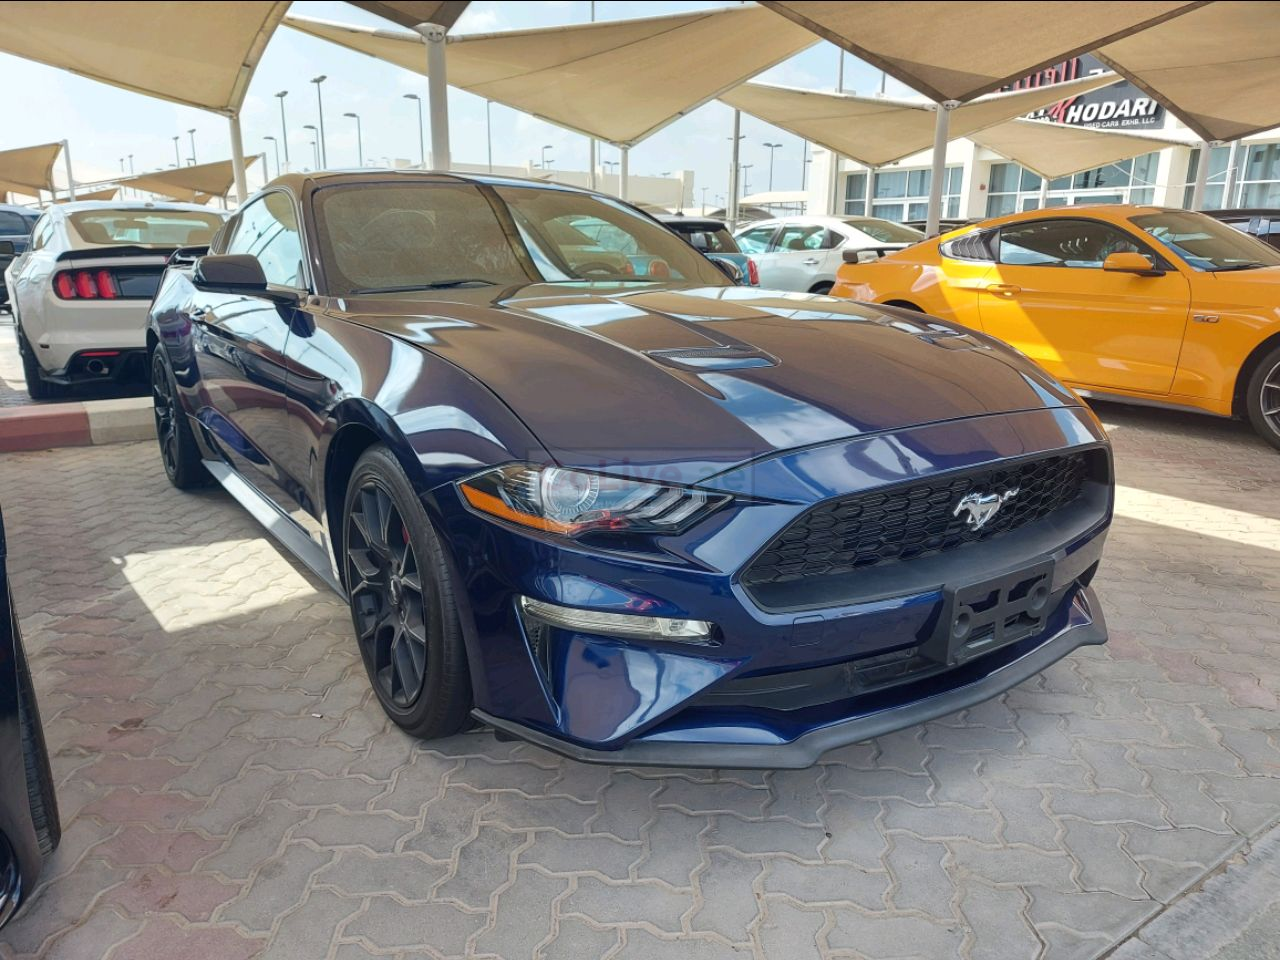 Ford Mustang 2018 AED 72,000, Good condition, US Spec